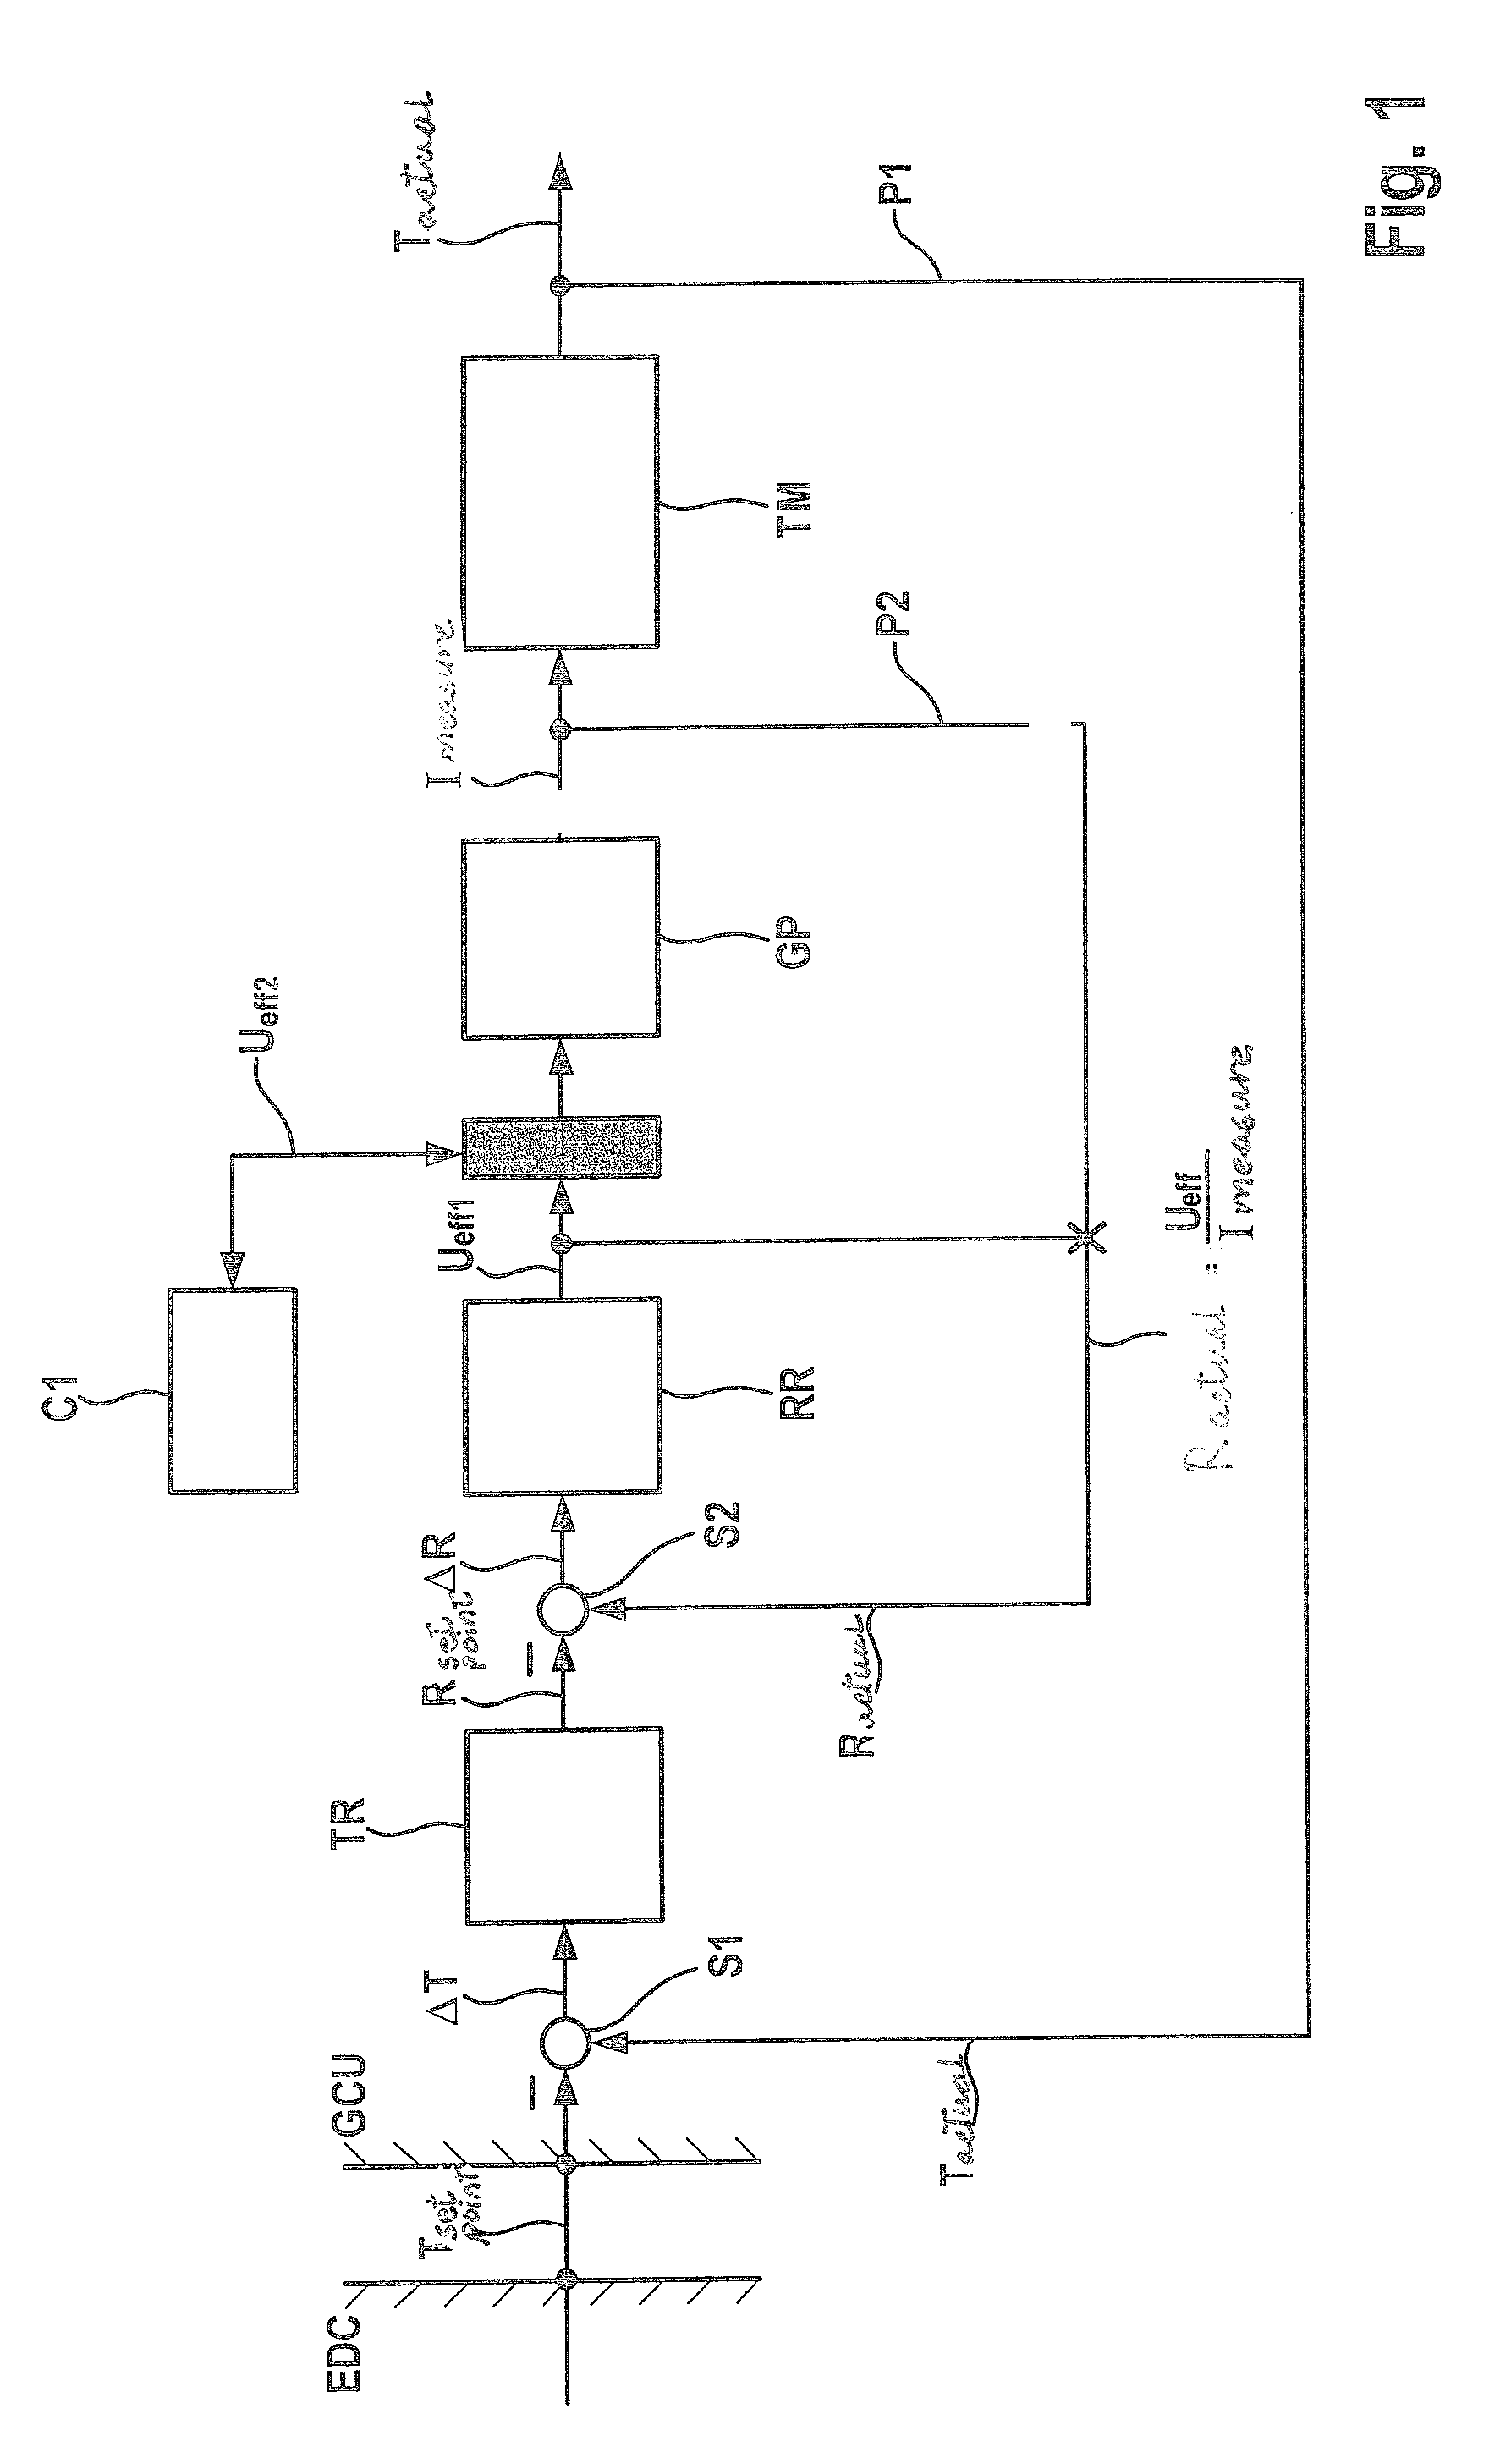 Method for controlling at least one sheathed-element glow plug in an internal combustion engine and engine controller